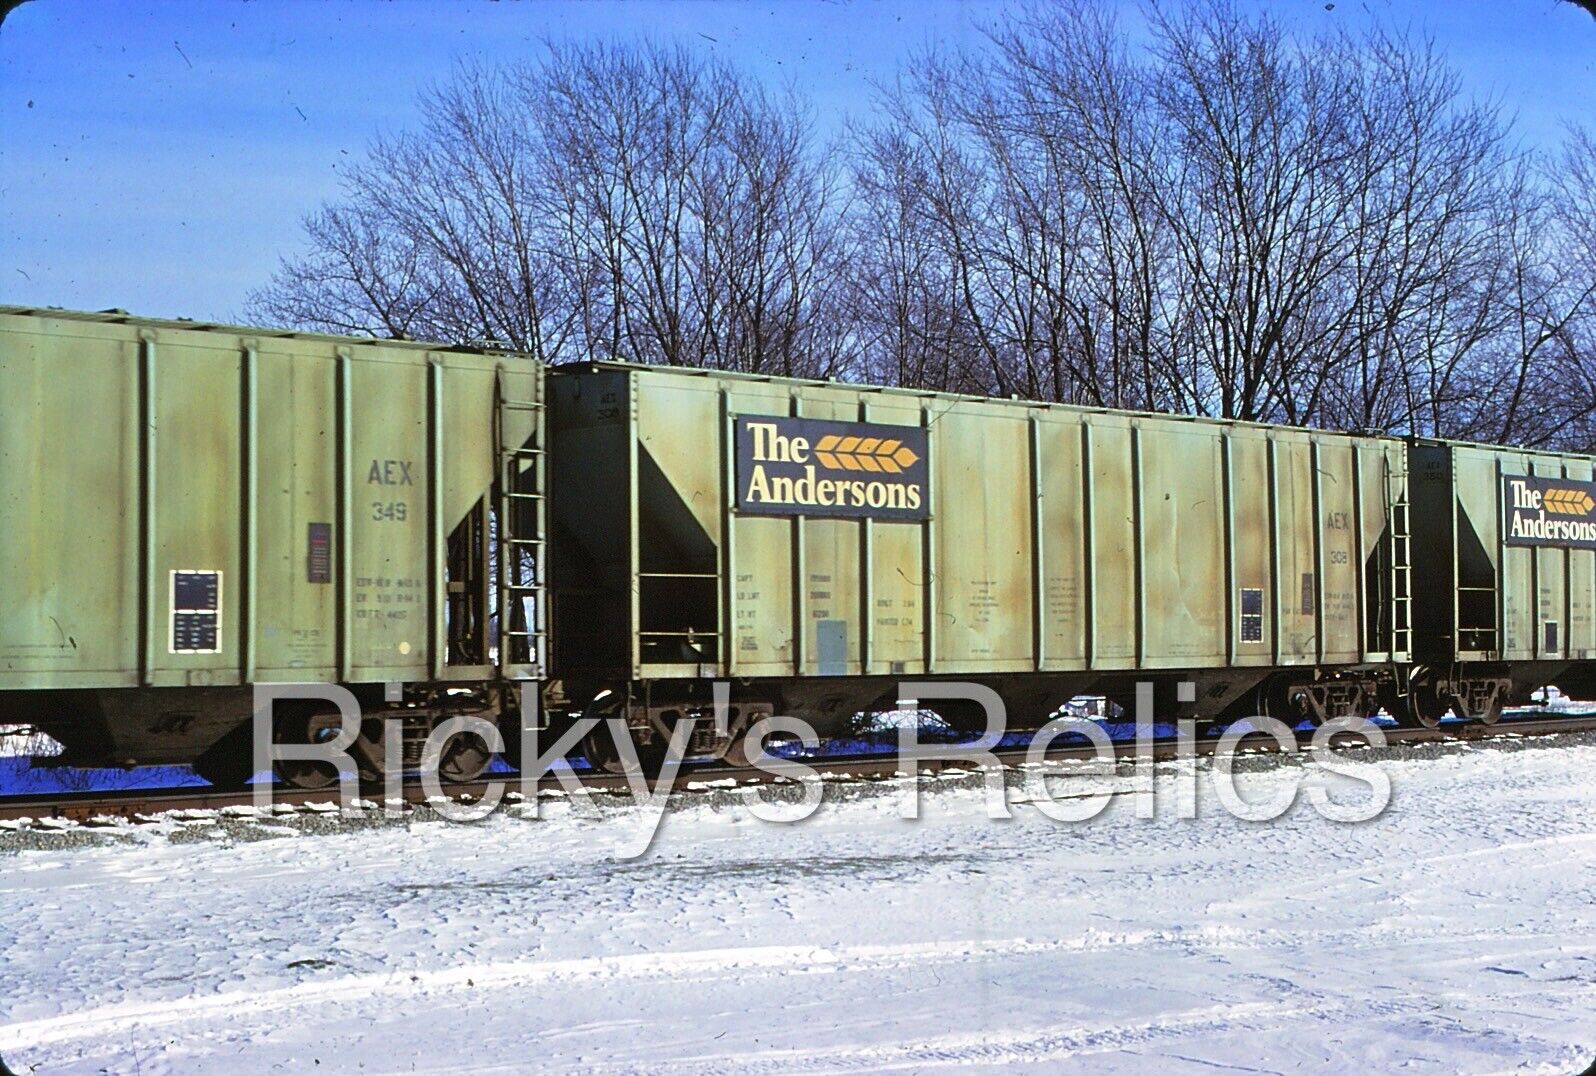 Original Slide AEX 308 Covered Hopper The Andersons 1980 Action